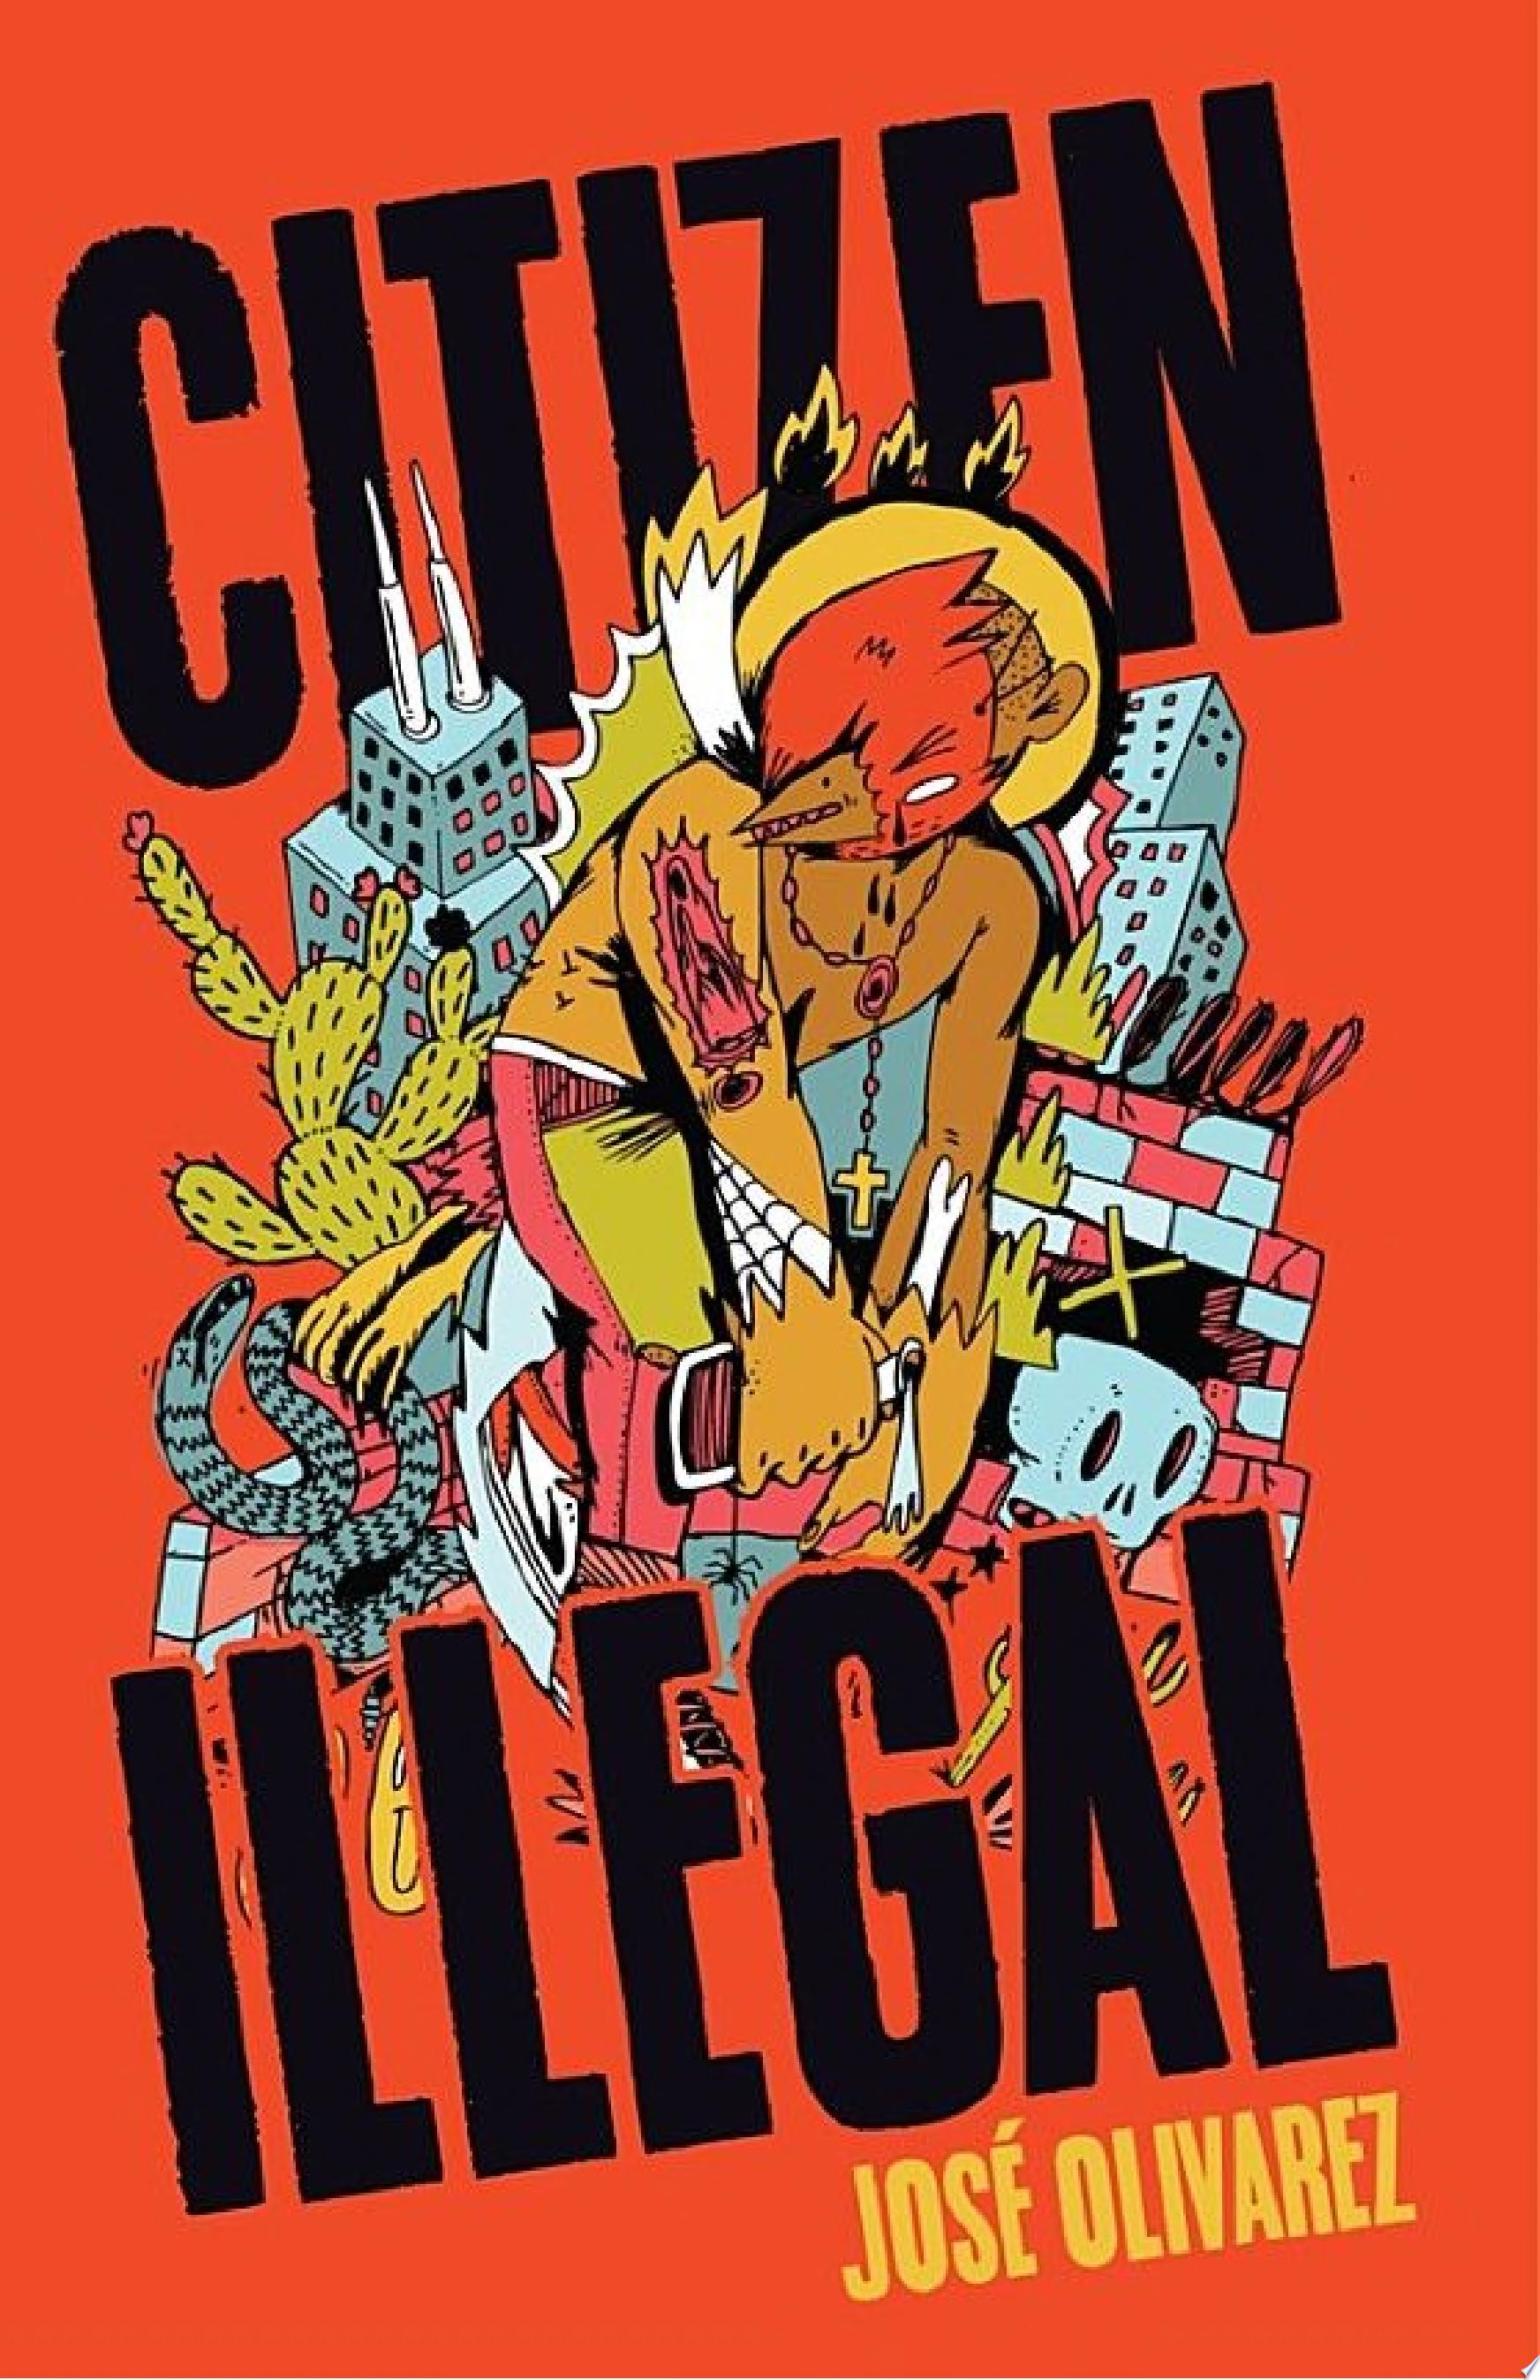 Image for "Citizen Illegal"